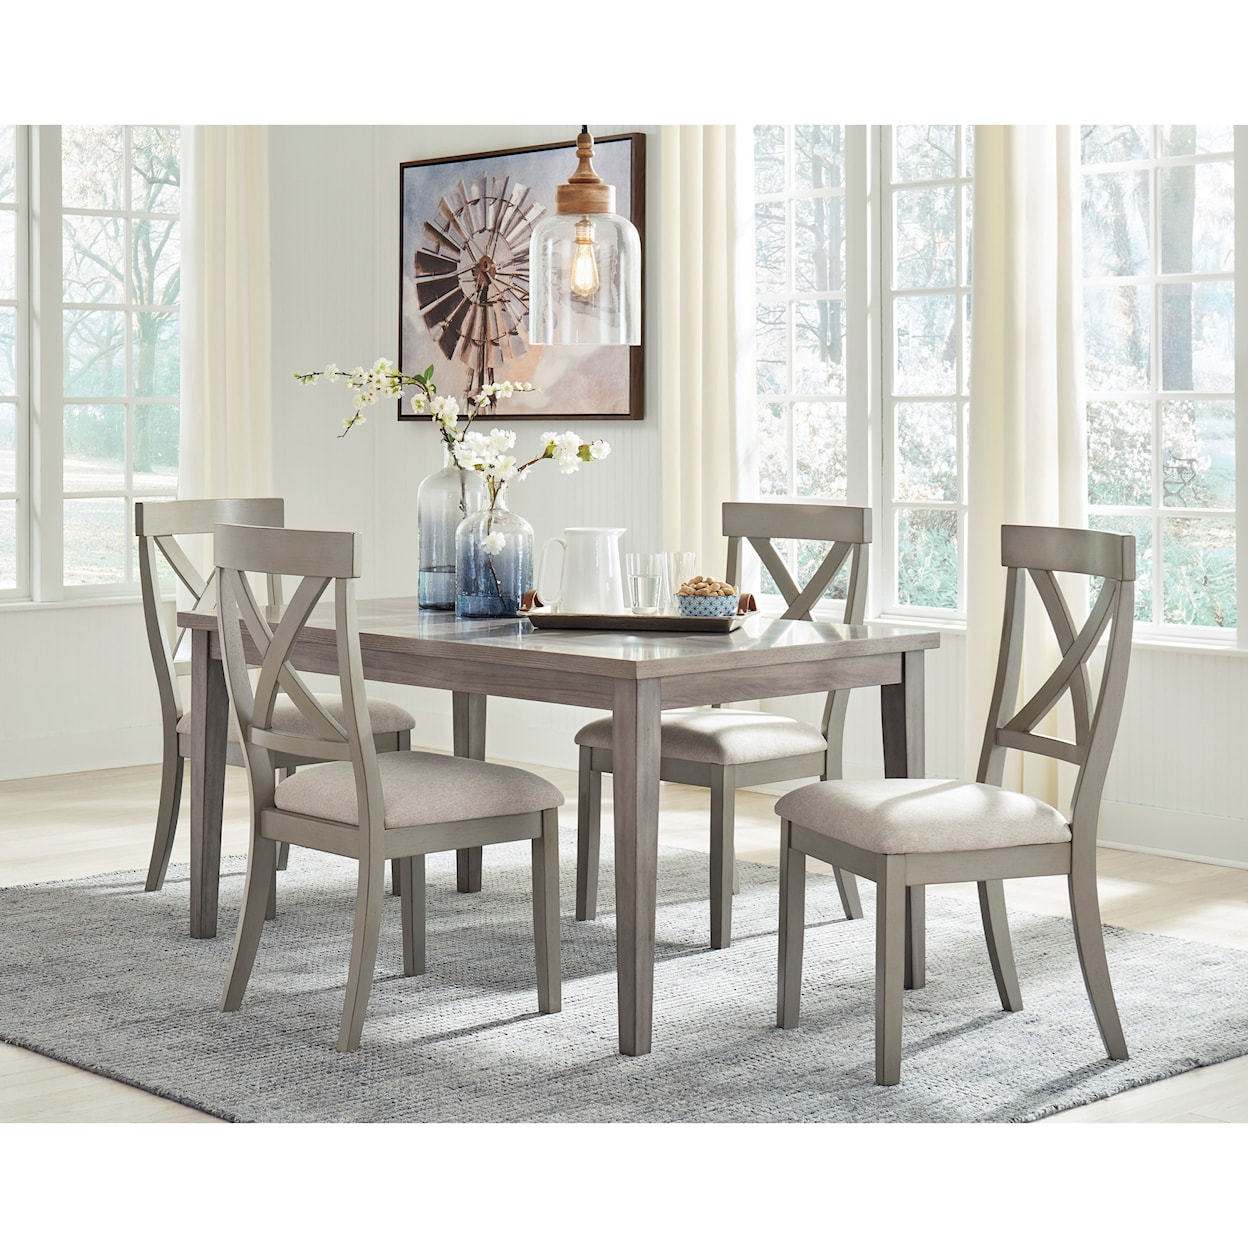 Signature Design by Ashley Parellen 5pc Dining Room Group